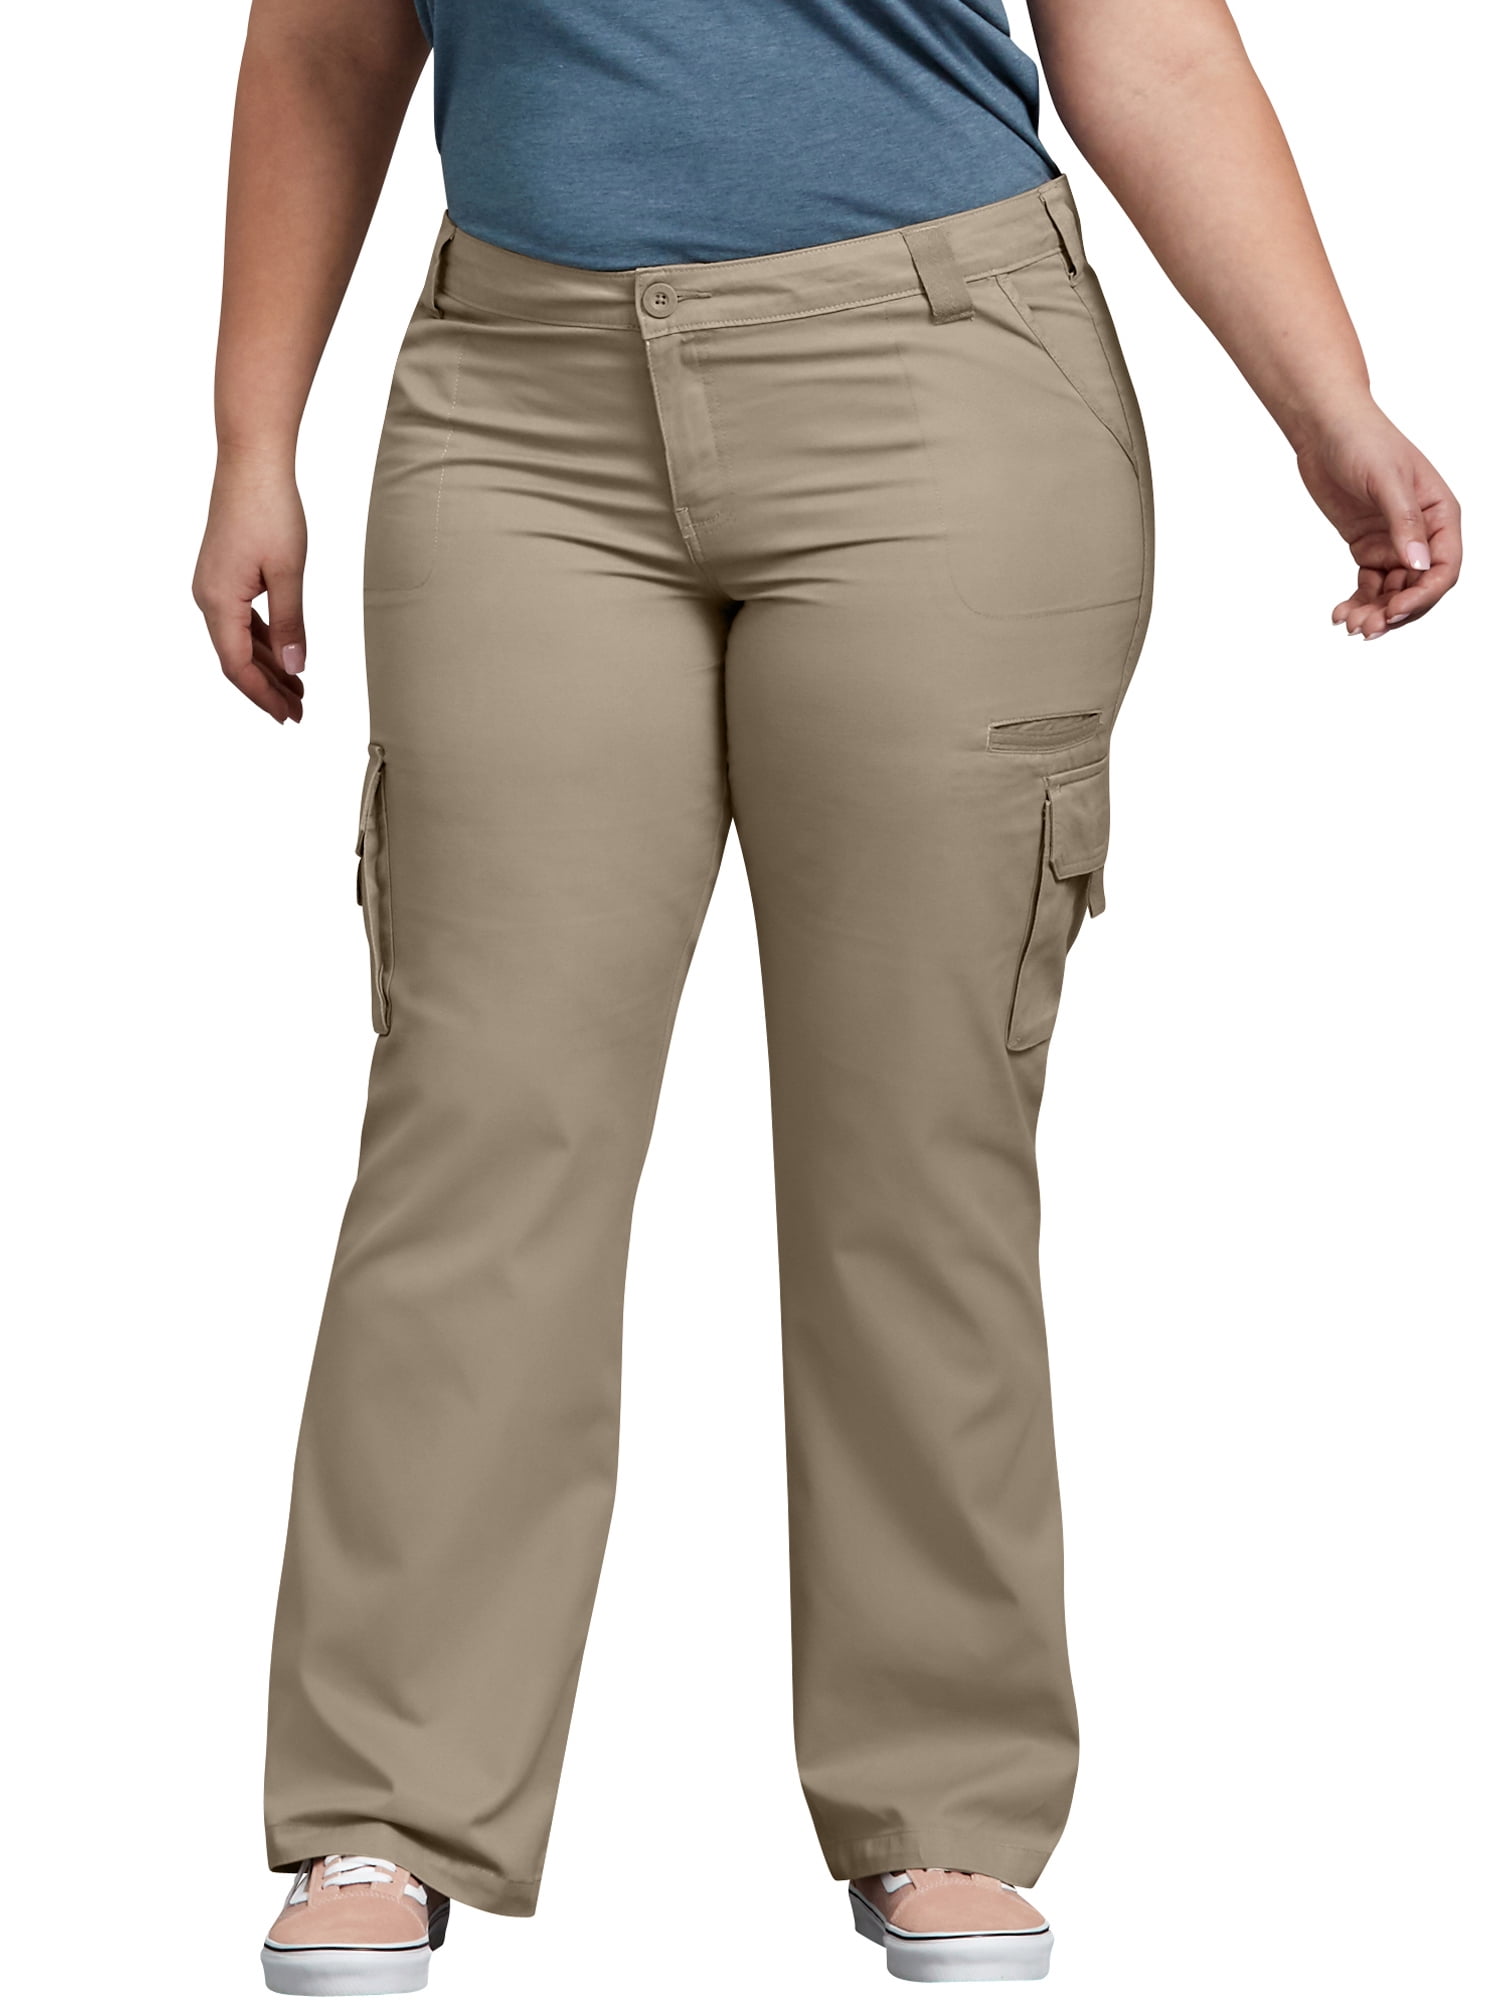 Plus Size Relaxed Fit Cargo Pants ...